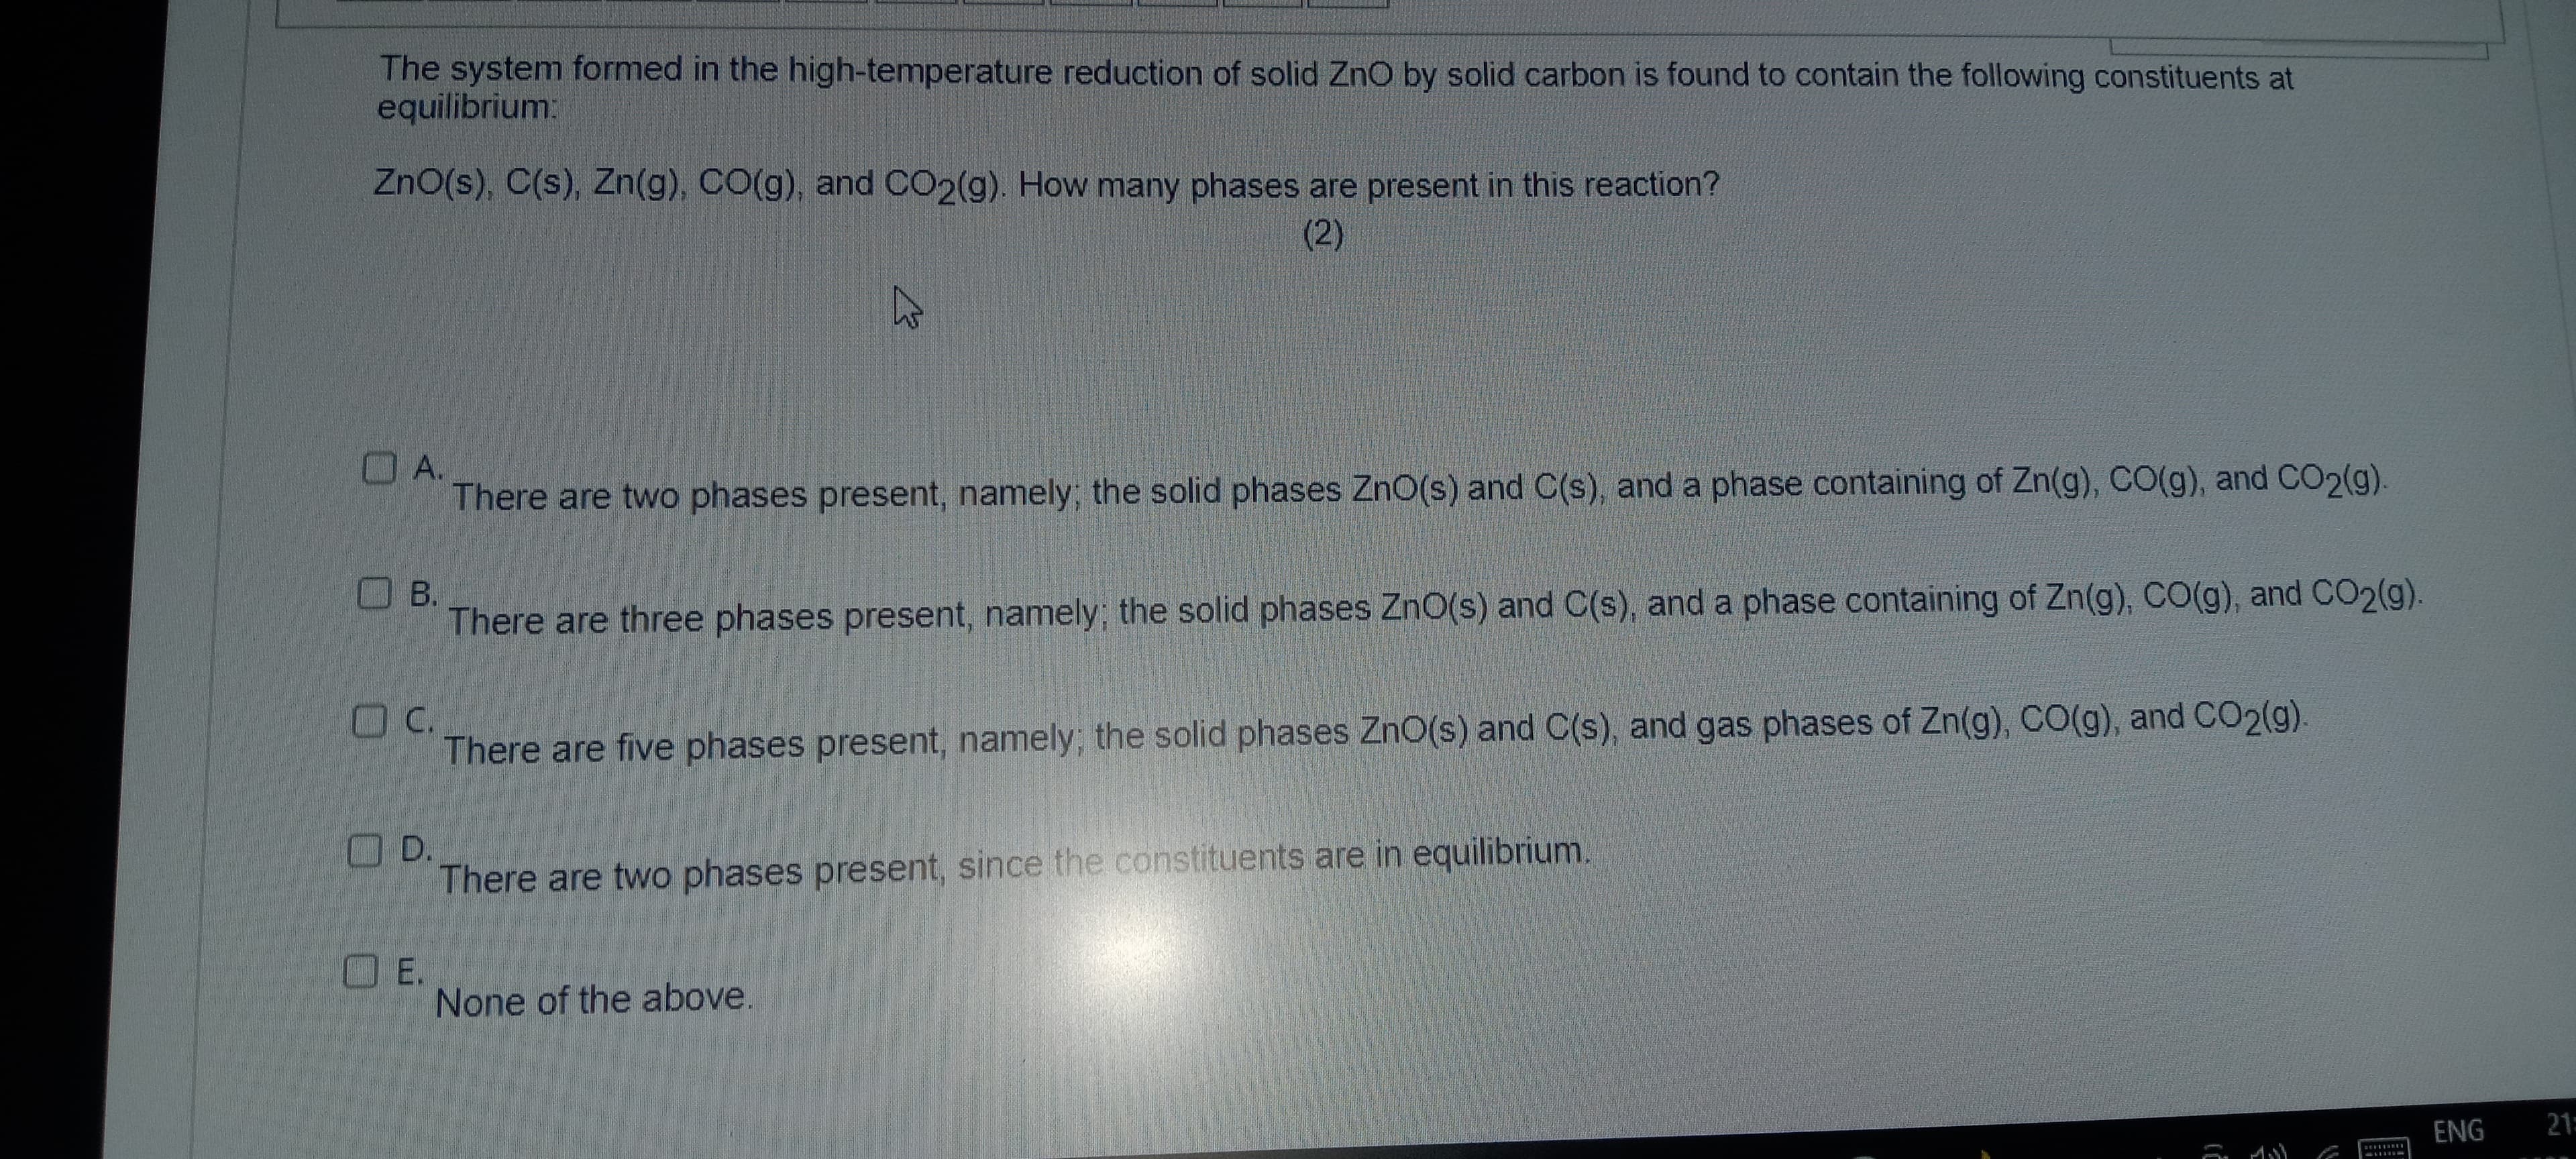 The system formed in the high-temperature reduction of solid ZnO by solid carbon is found to contain the following constituents at
equilibrium:
ZnO(s), C(s), Zn(g), CO(g), and CO2(g). How many phases are present in this reaction?
(2)
A.
There are two phases present, namely; the solid phases ZnO(s) and C(s), and a phase containing of Zn(g), CO(g), and CO2(g).
B.
پر
E.
There are three phases present, namely; the solid phases ZnO(s) and C(s), and a phase containing of Zn(g), CO(g), and CO2(g).
C.
There are five phases present, namely; the solid phases ZnO(s) and C(s), and gas phases of Zn(g), CO(g), and CO2(g).
D.
There are two phases present, since the constituents are in equilibrium.
None of the above.
ENG
21: